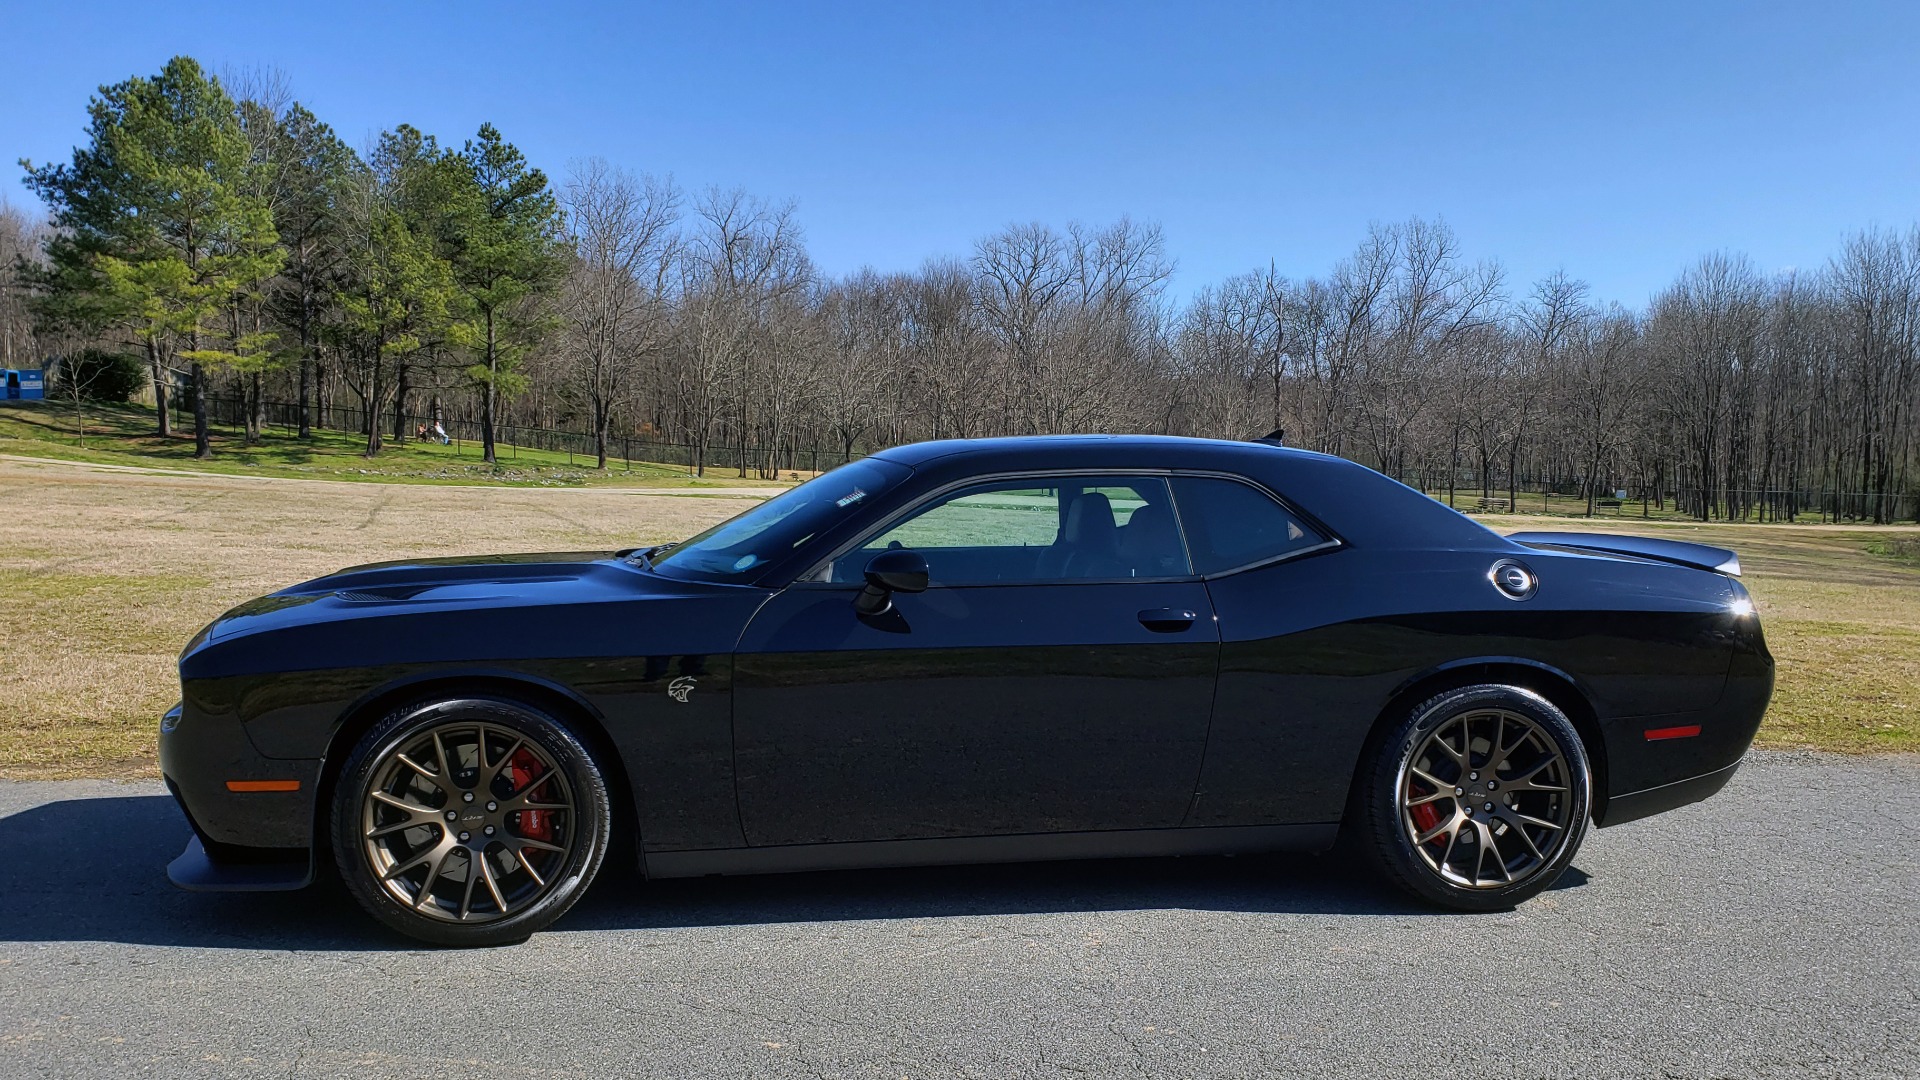 Used 2016 Dodge CHALLENGER SRT HELLCAT / NAV / SUNROOF / REARVIEW / BRASS MONKEY for sale Sold at Formula Imports in Charlotte NC 28227 6